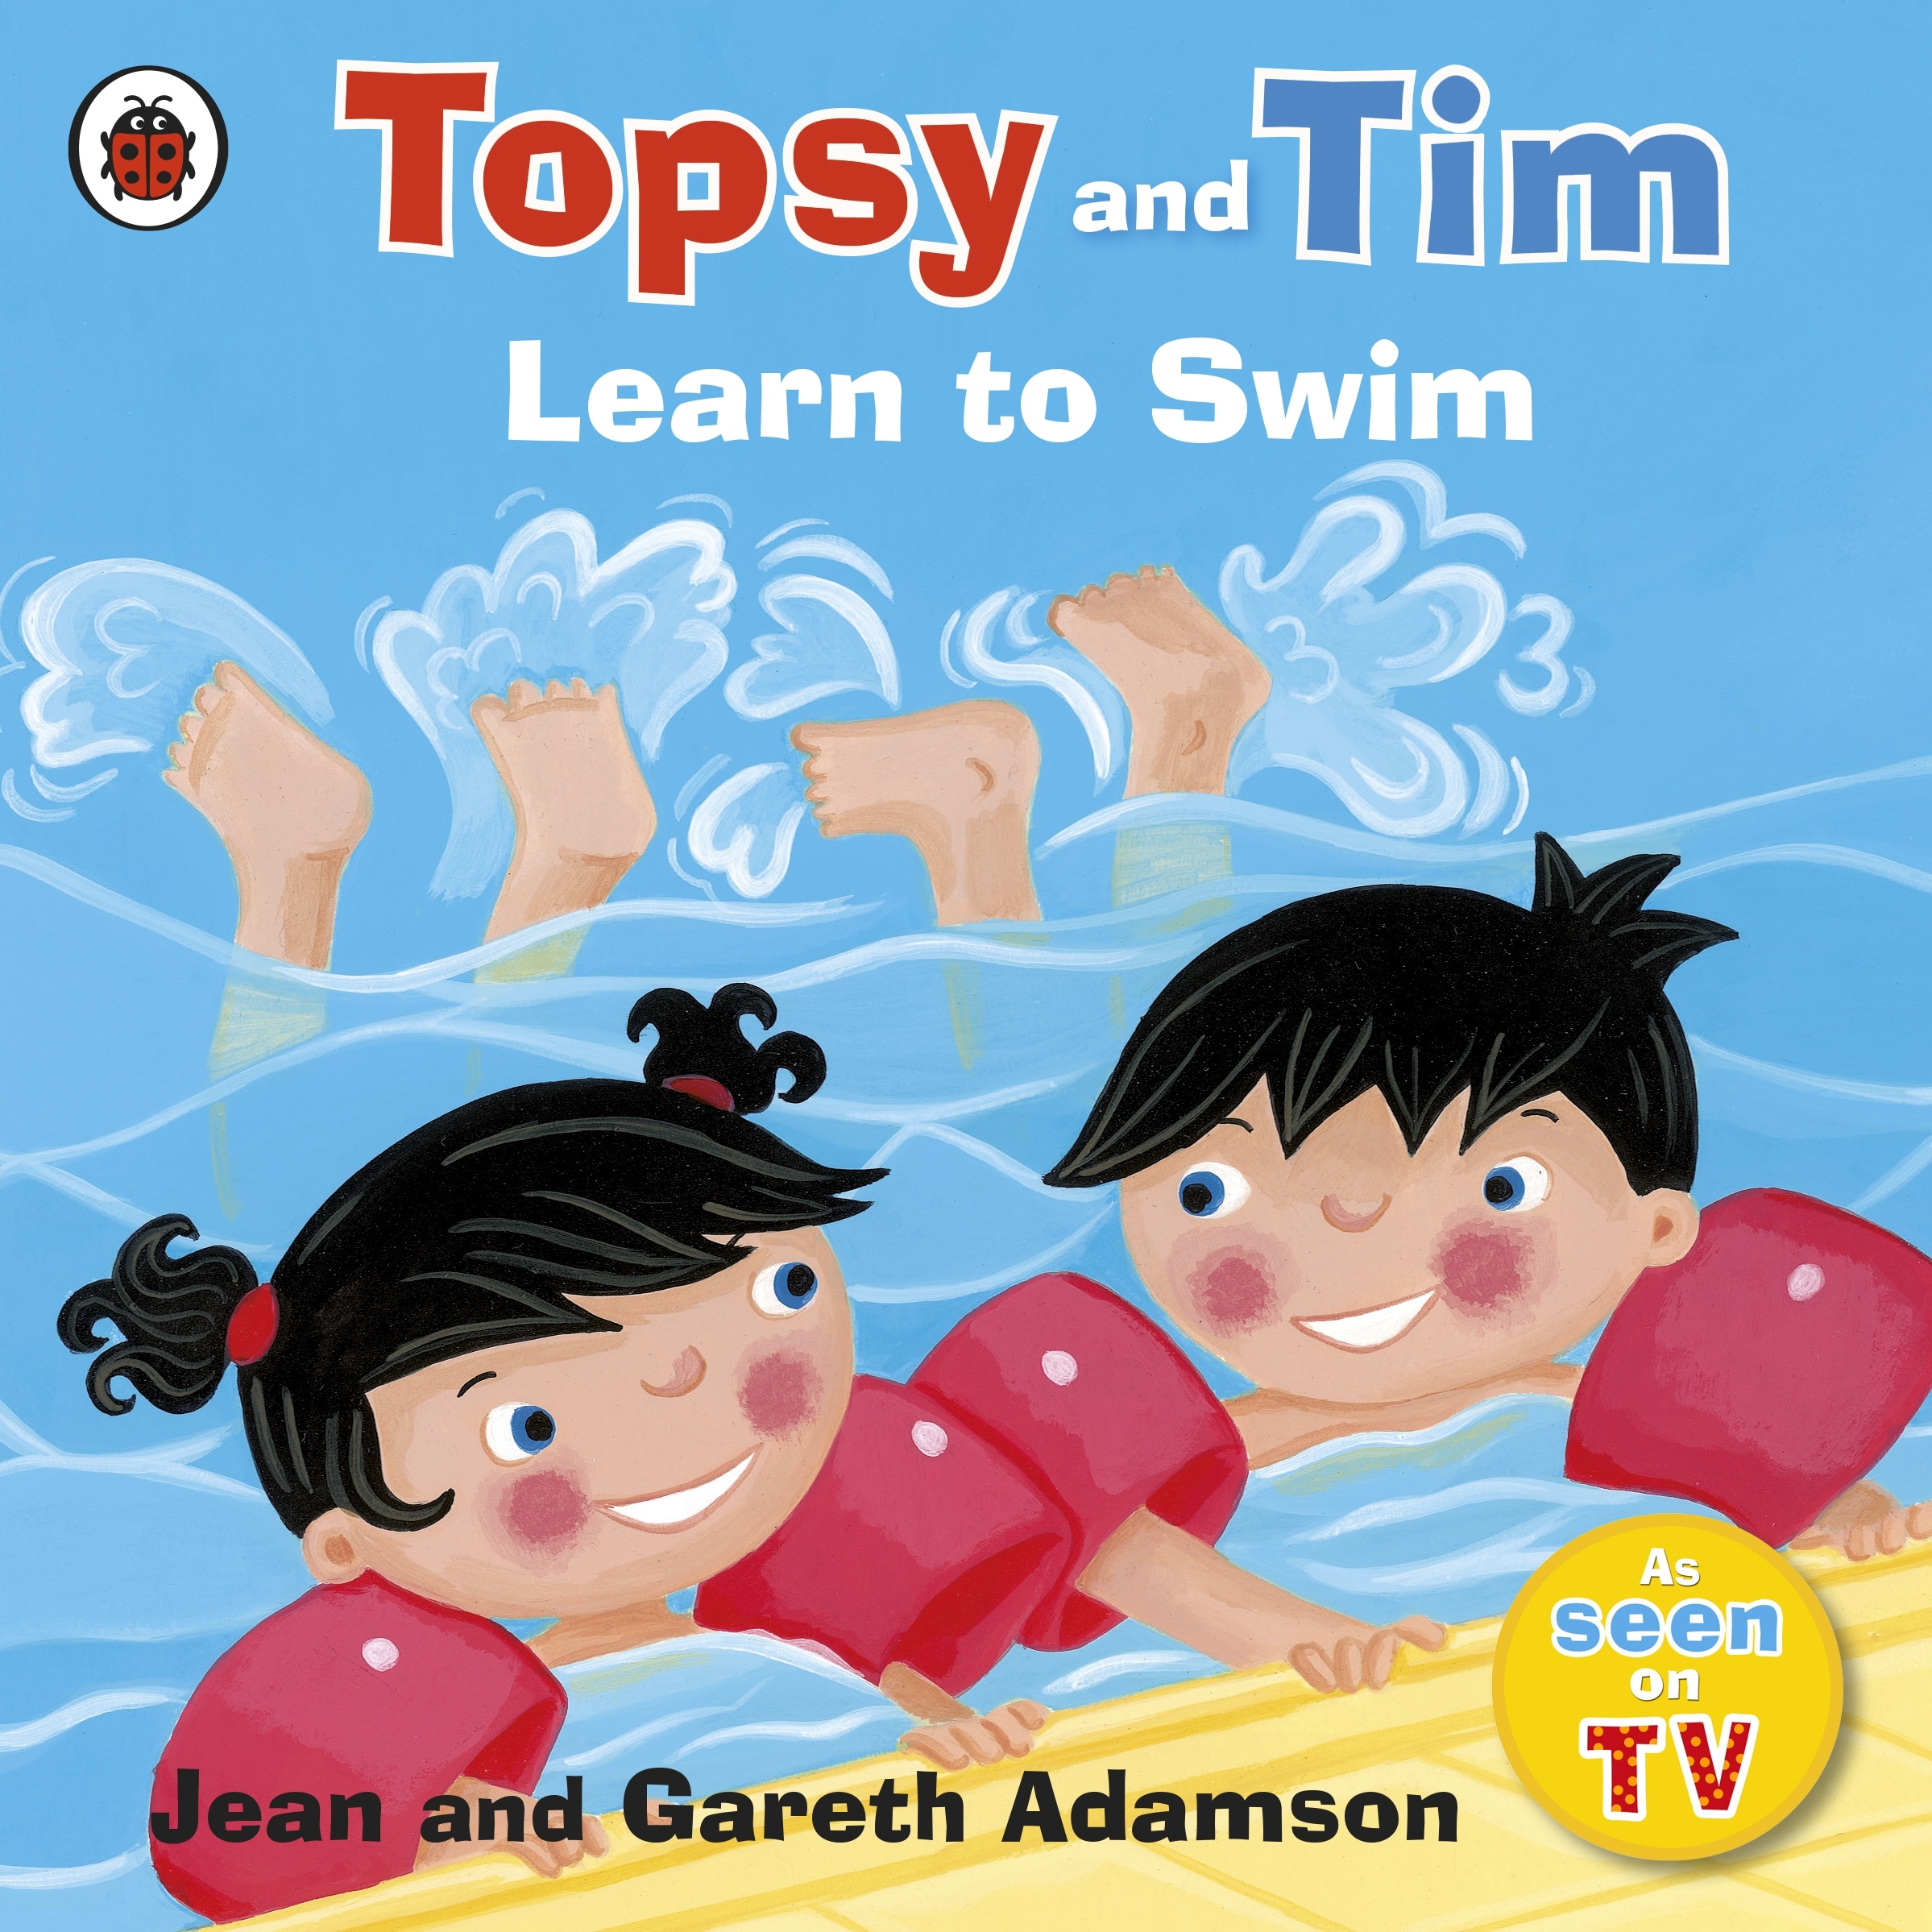 Book “Topsy and Tim: Learn to Swim” by Jean Adamson — April 2, 2009